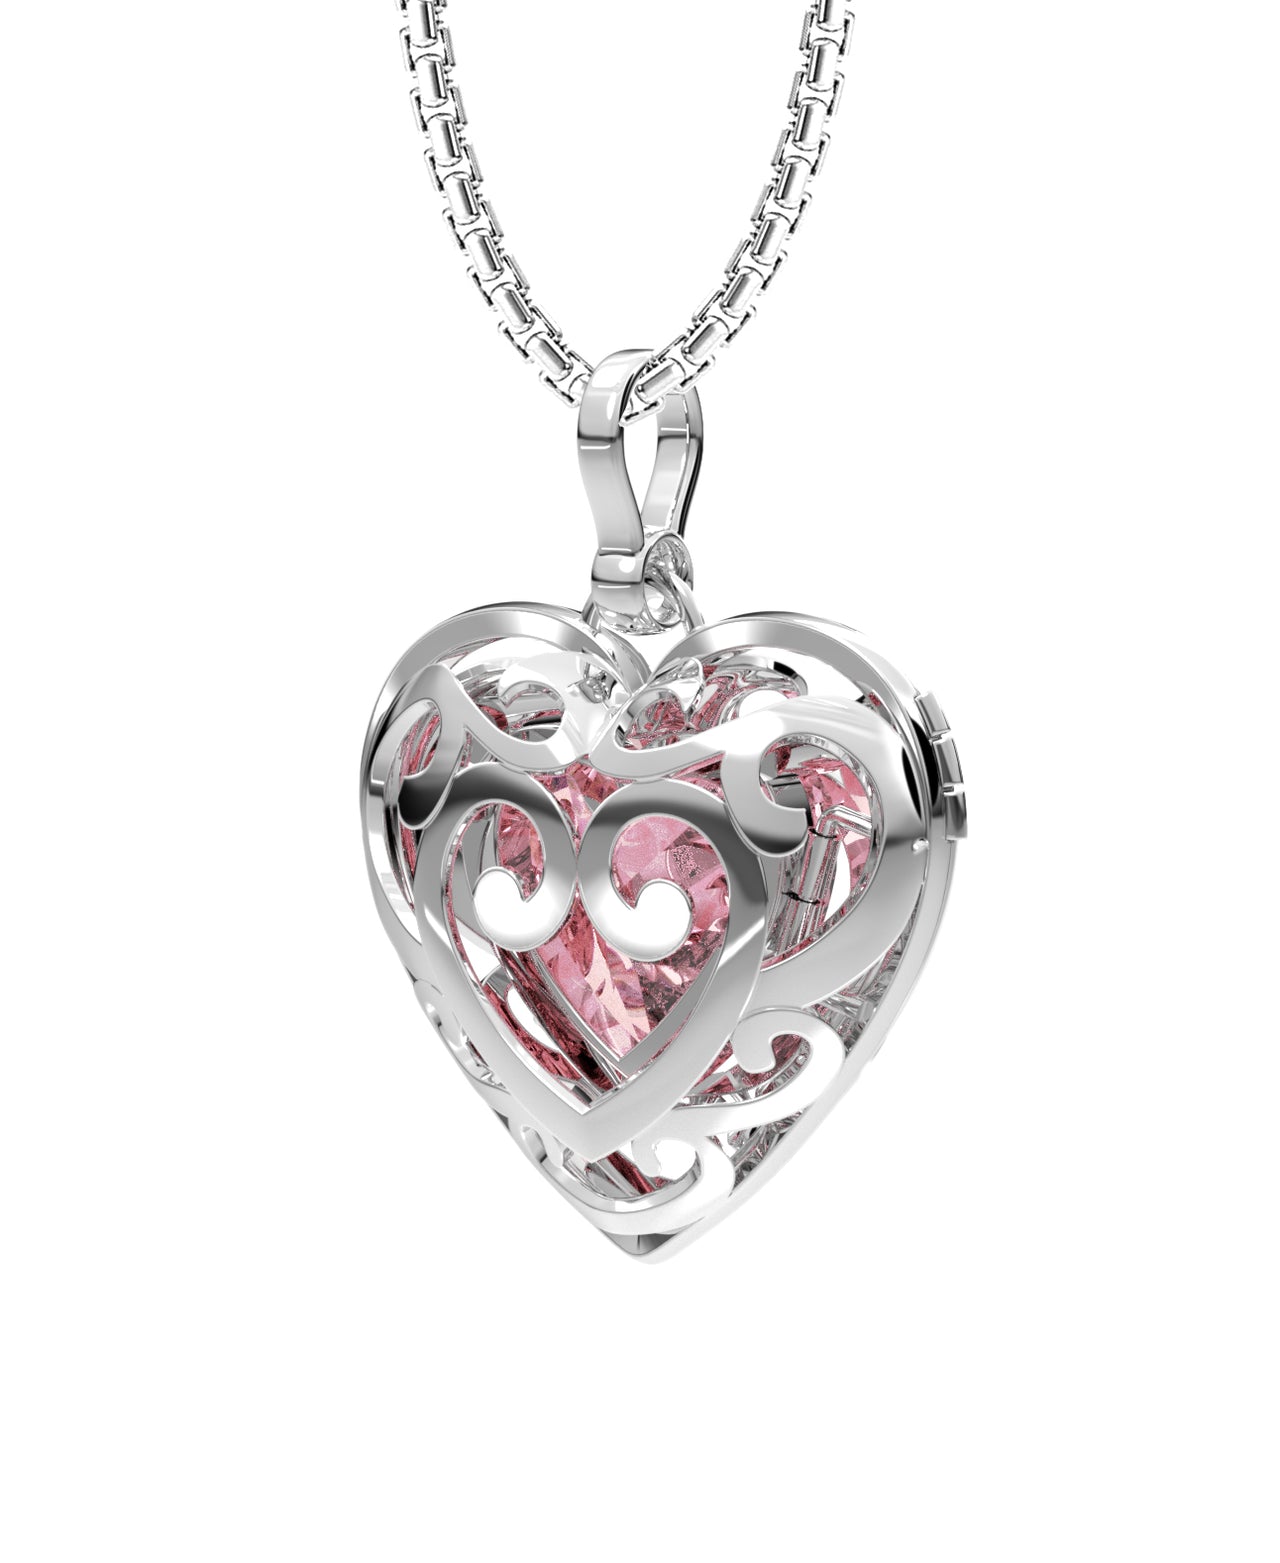 Small Ladies 925 Sterling Silver Polished Gemstone Heart Locket Pendant Necklace, 20mm